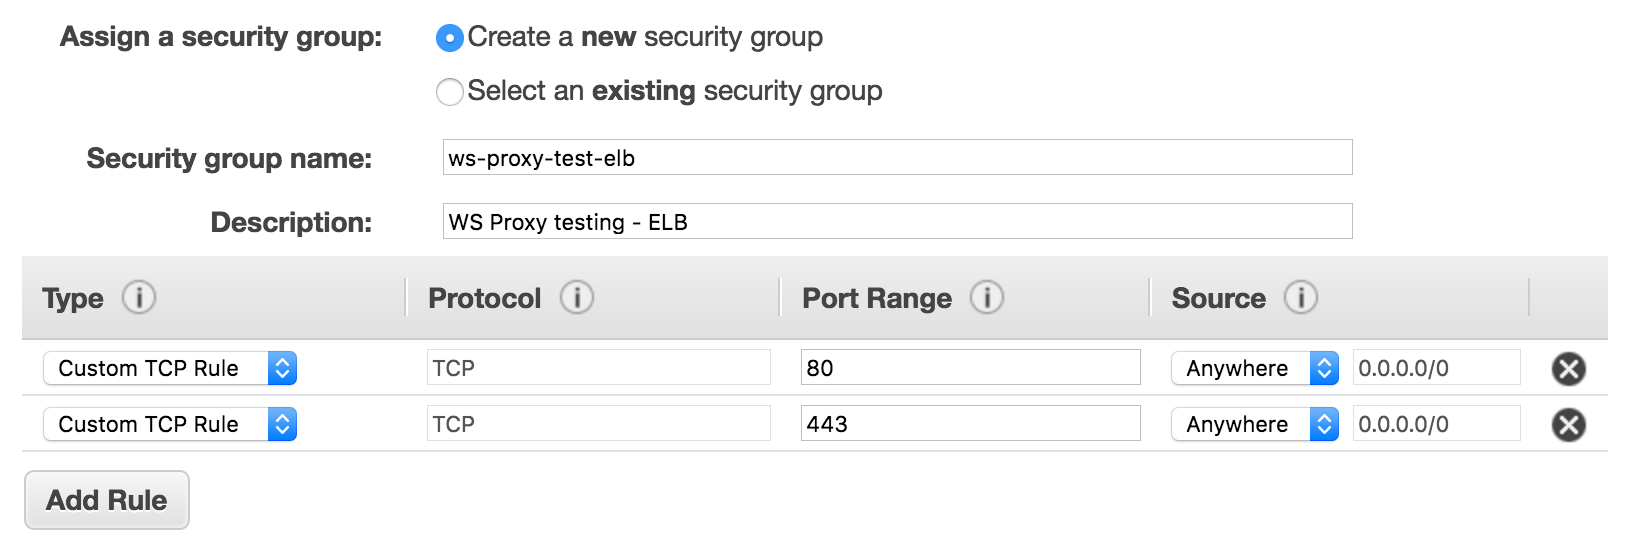 ELB Security Group Definition